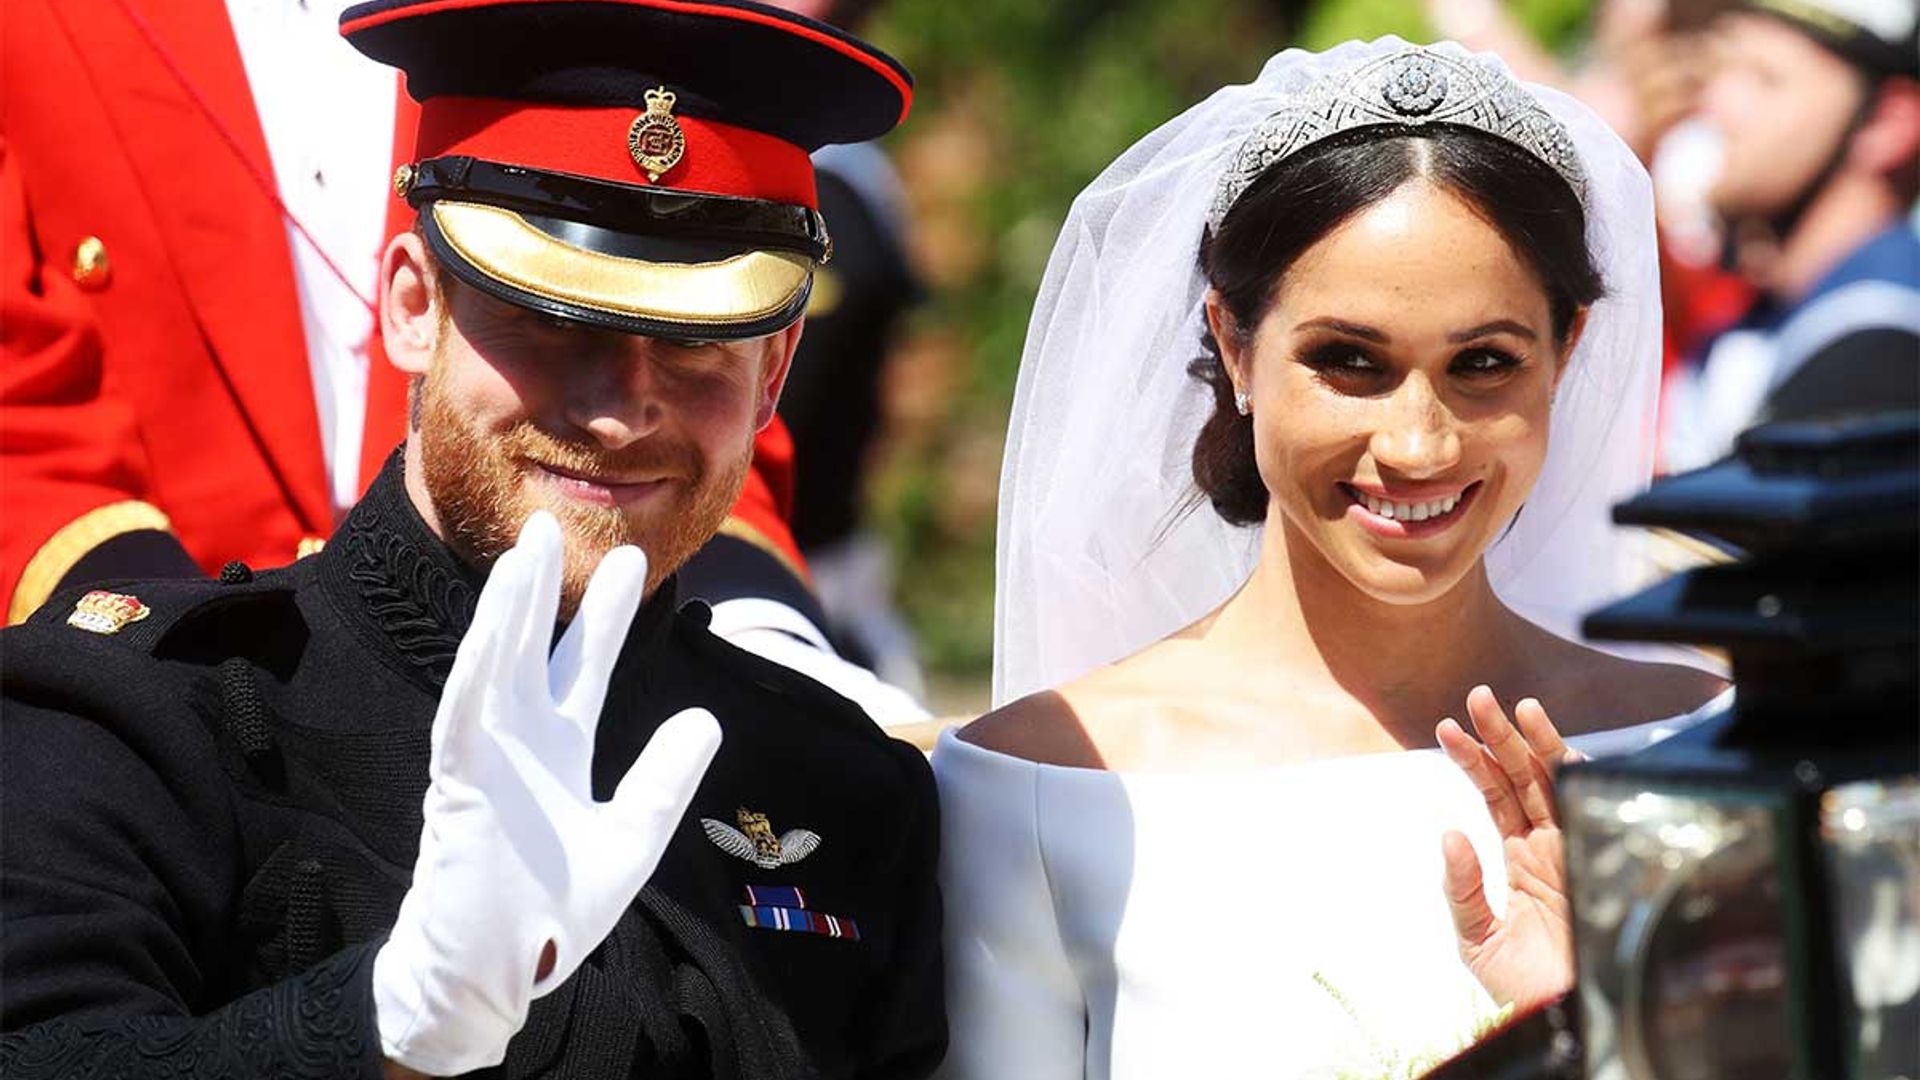 Prince Harry and Meghan Markle's wedding choirmaster shares inside details of royal nuptials